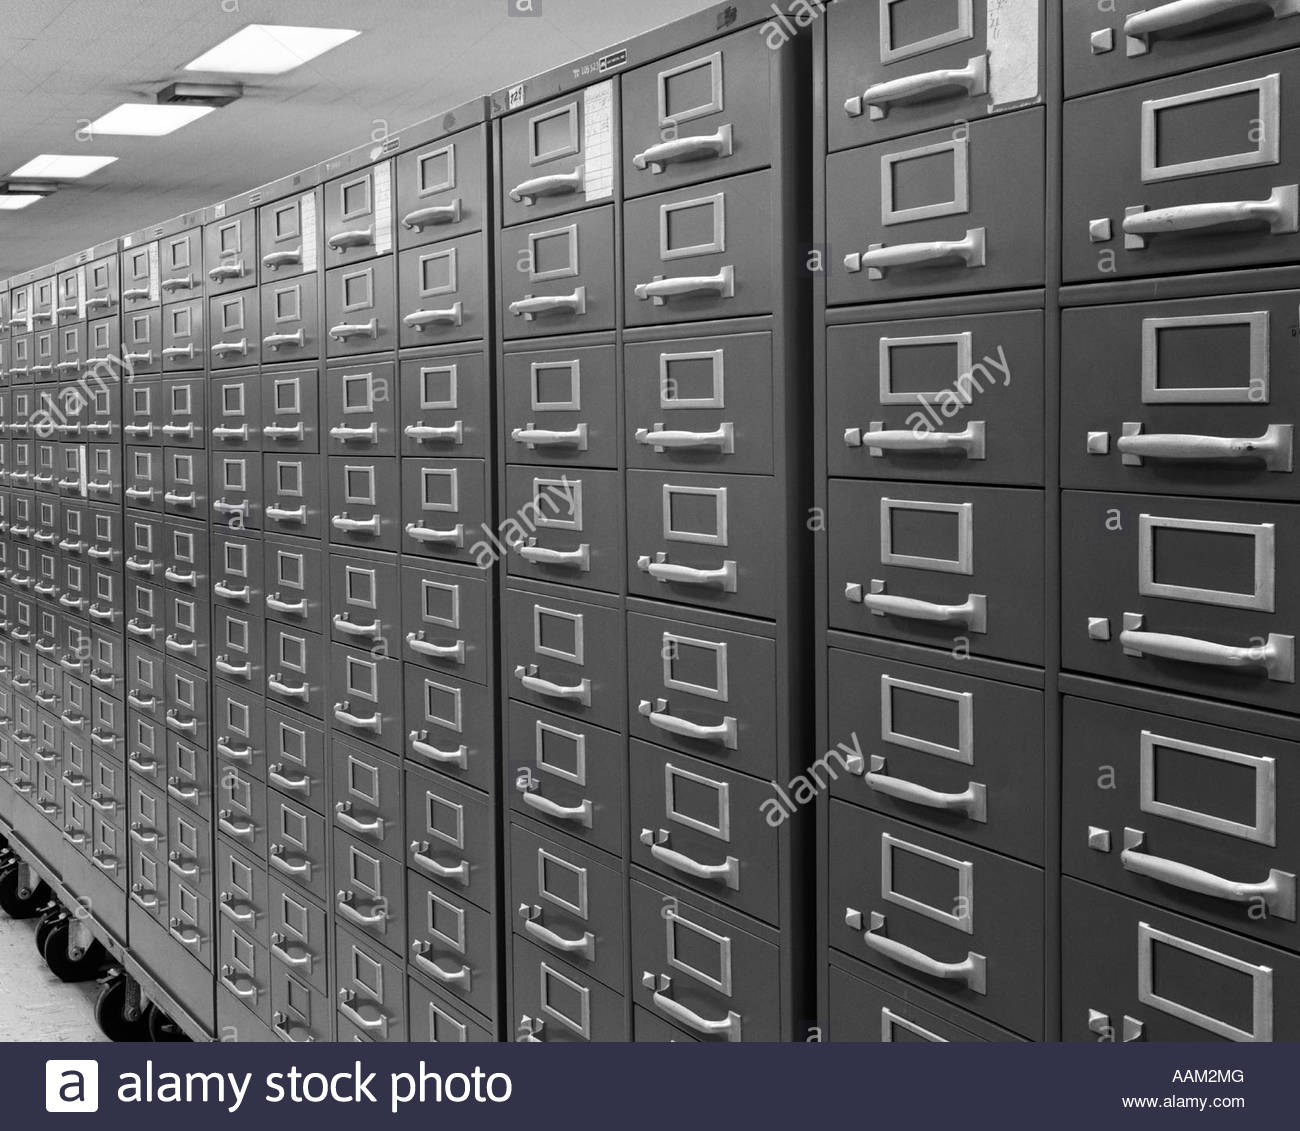 1970s Angled View Of Series Of Index Card File Cabinets On Wheels intended for measurements 1300 X 1131